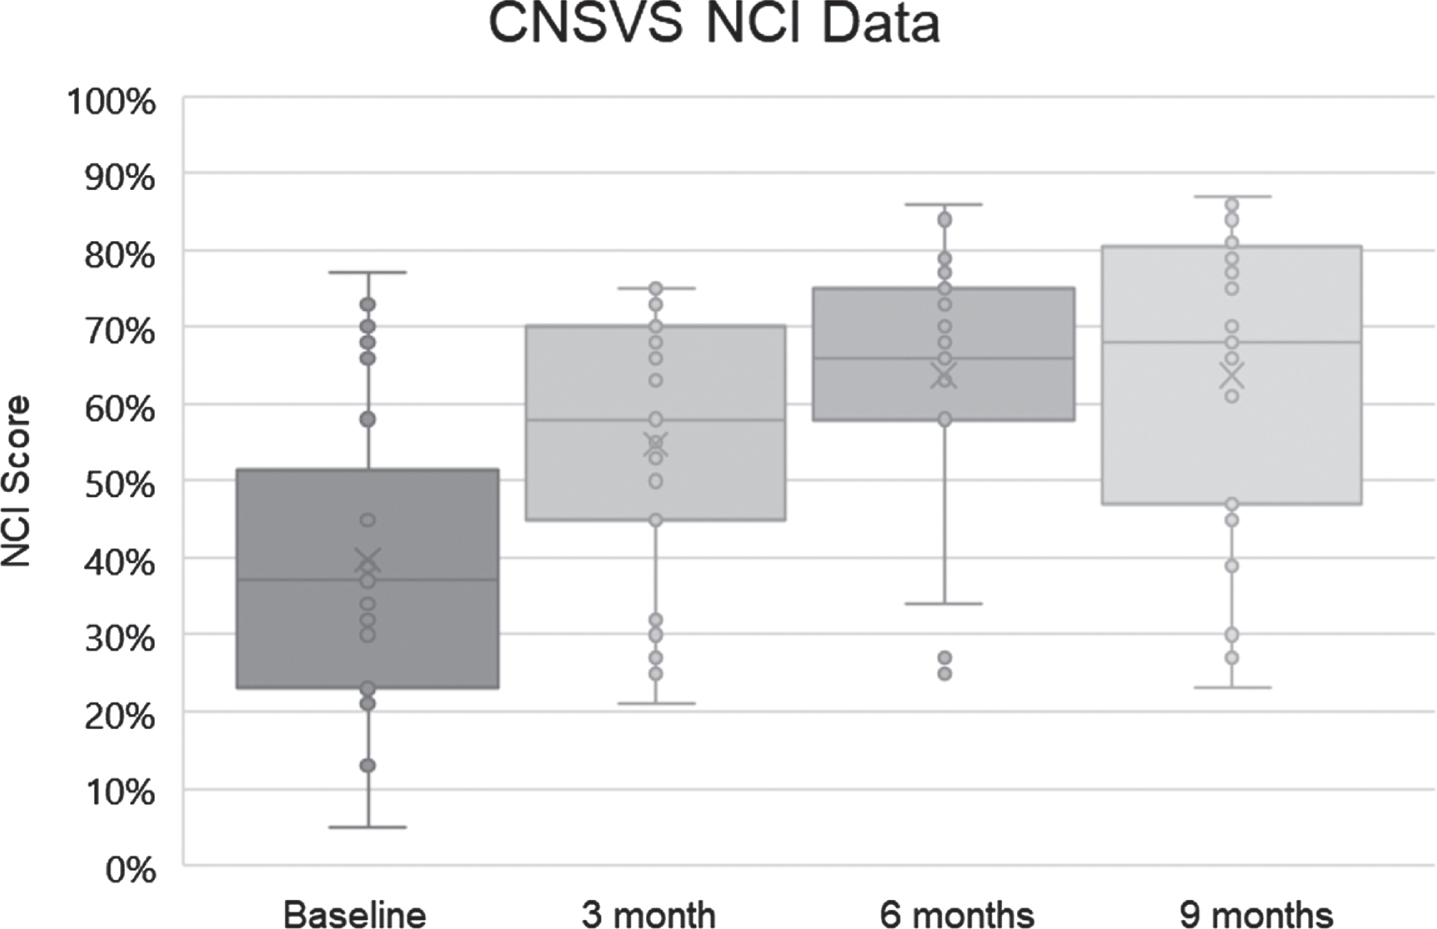 Neurocognitive indices (NCI) for the 25 patients at baseline, 3 months, 6 months, and 9 months. Dots represent scores, boxes represent second and third quartiles, horizontal lines within boxes represent medians, x represents means, and whiskers represent first and fourth quartiles. The ordinate represents NCI as percentile for age.